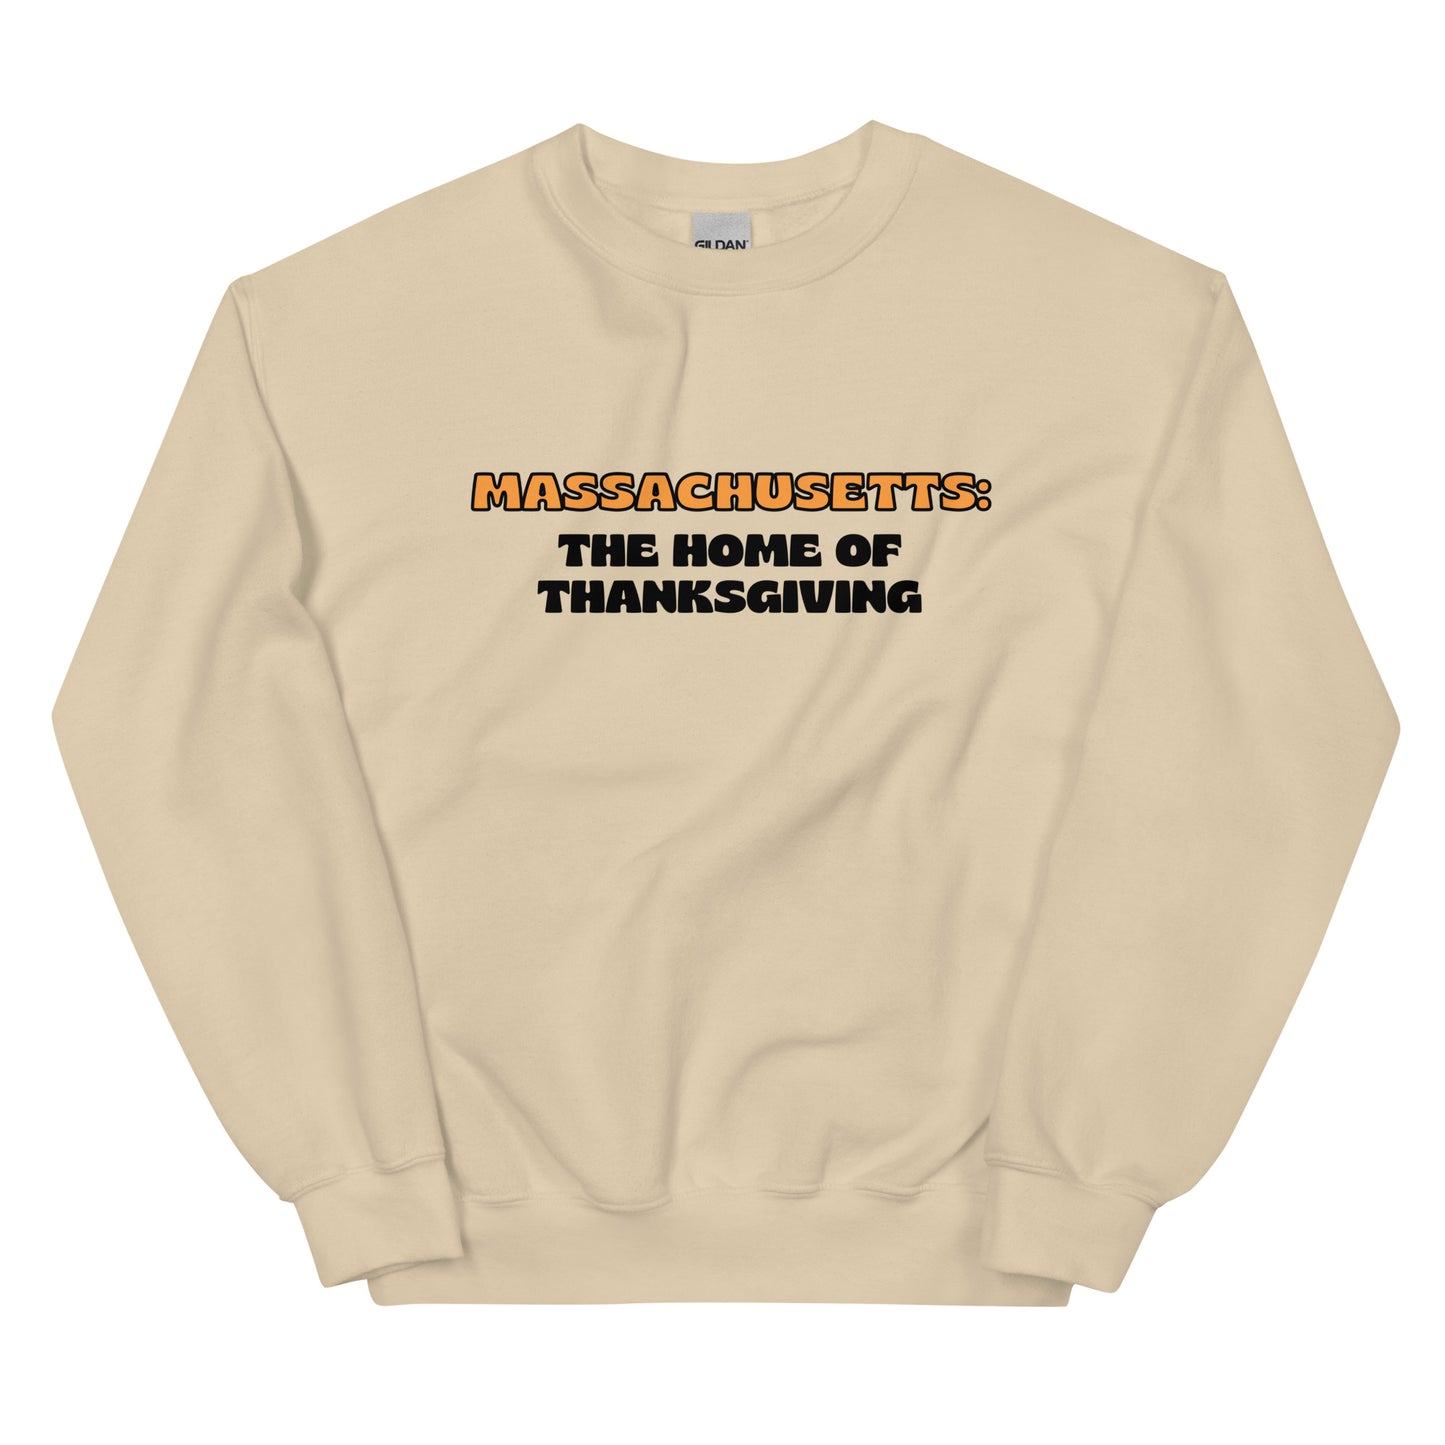 The Home of Thanksgiving Crewneck